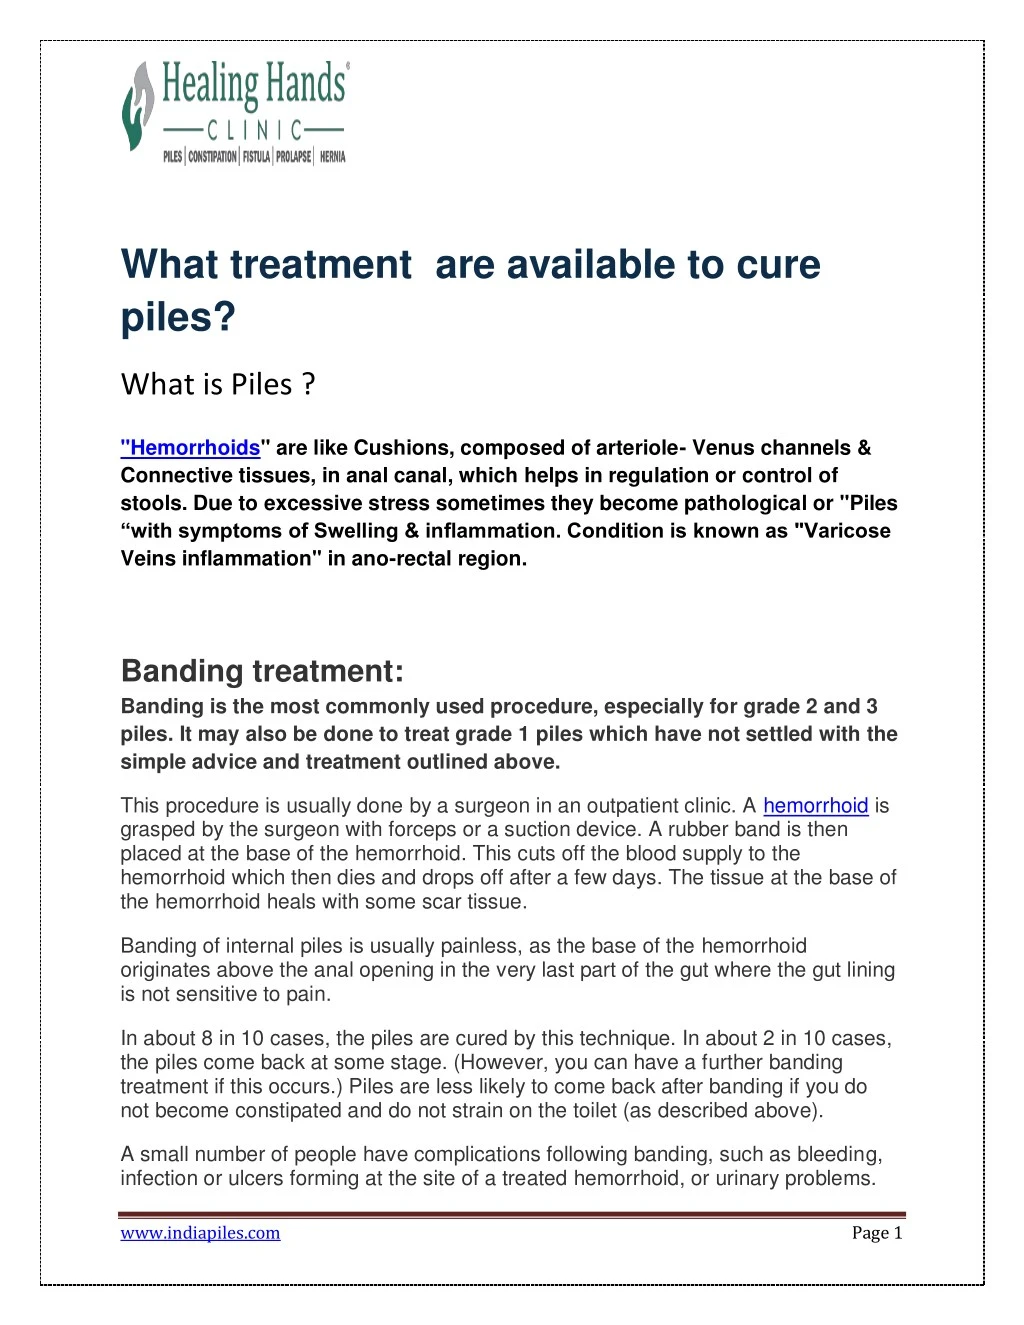 what treatment are available to cure piles